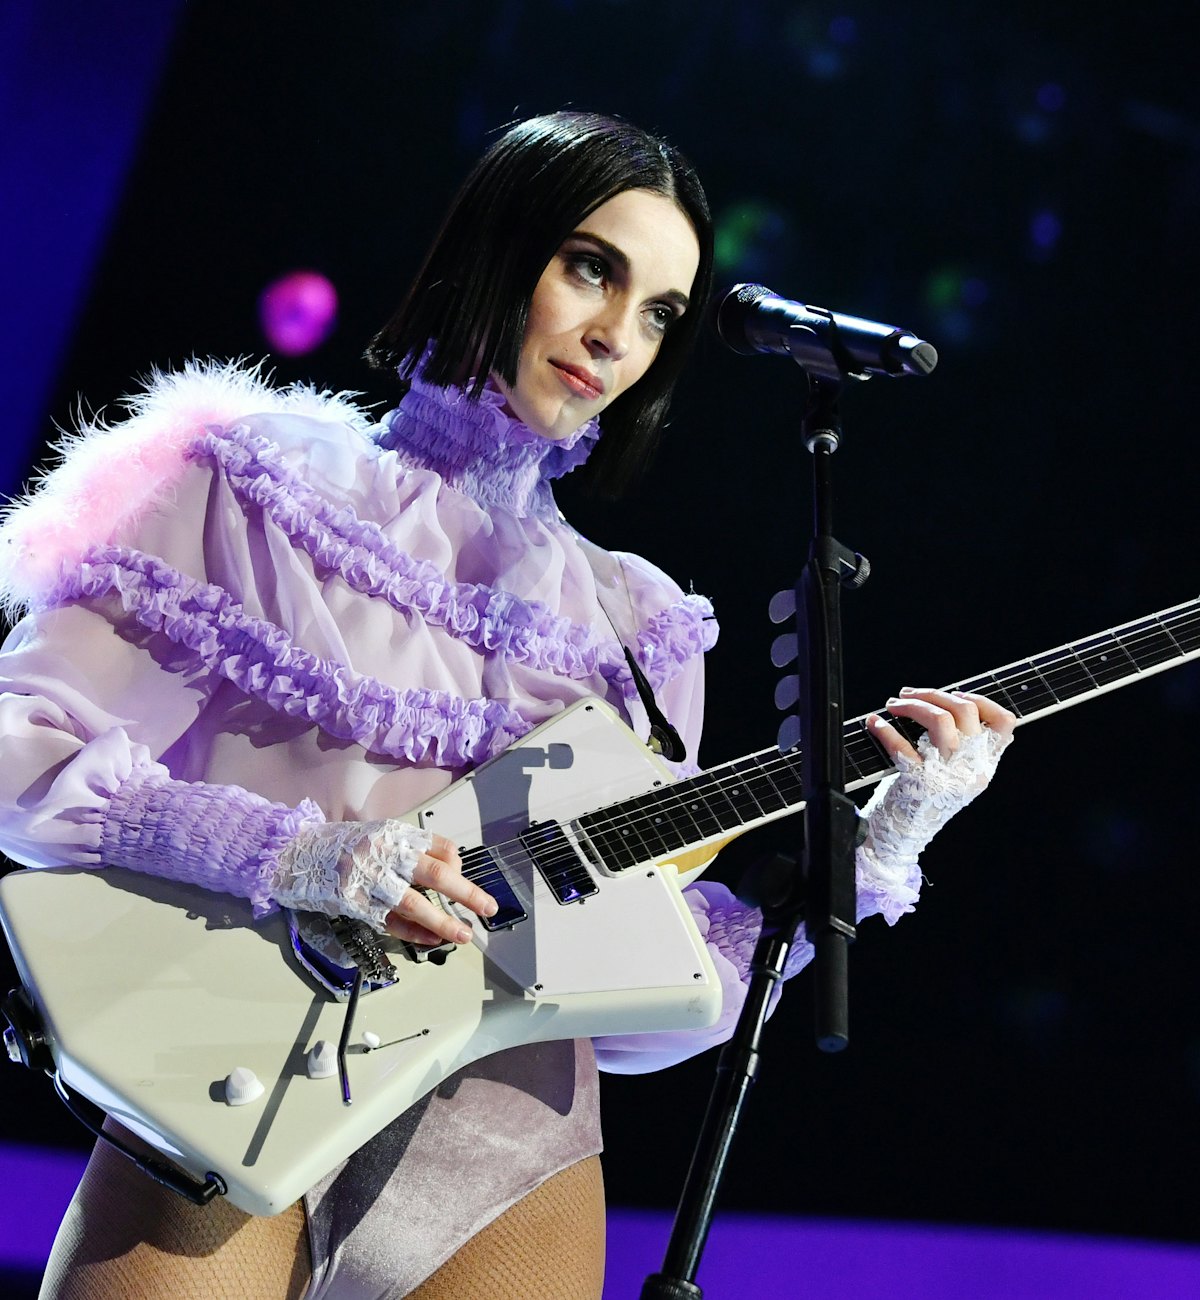 Annie Clark (St. Vincent) playing guitar in a purple ruffled shirt